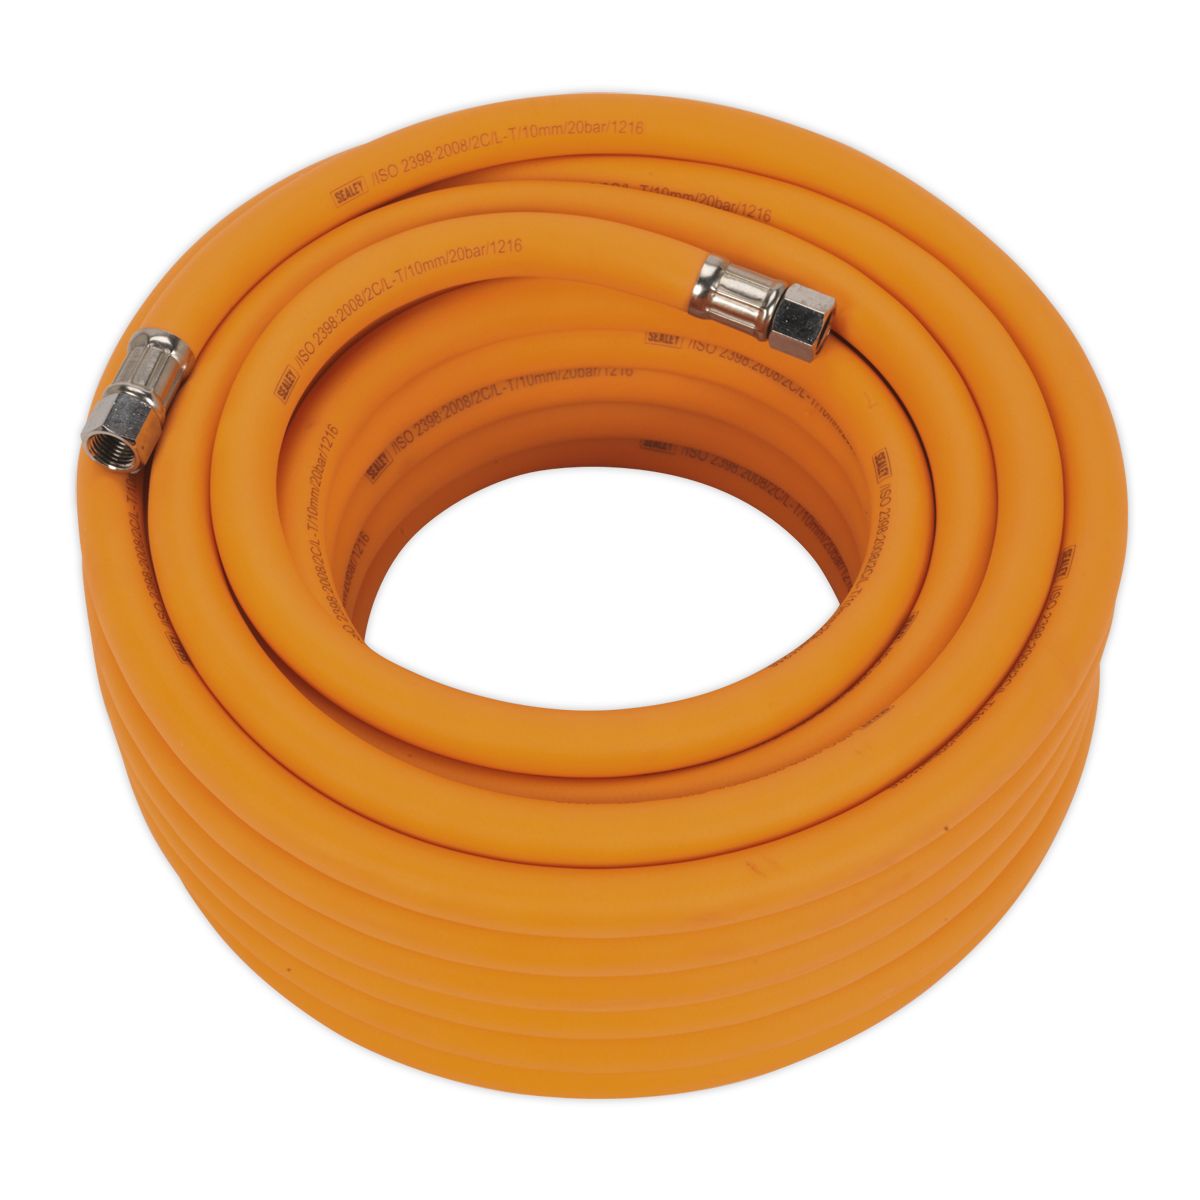 Sealey AHHC1538 Air Hose 15m x 10mm Hybrid High Visibility with 1/4"BSP Unions